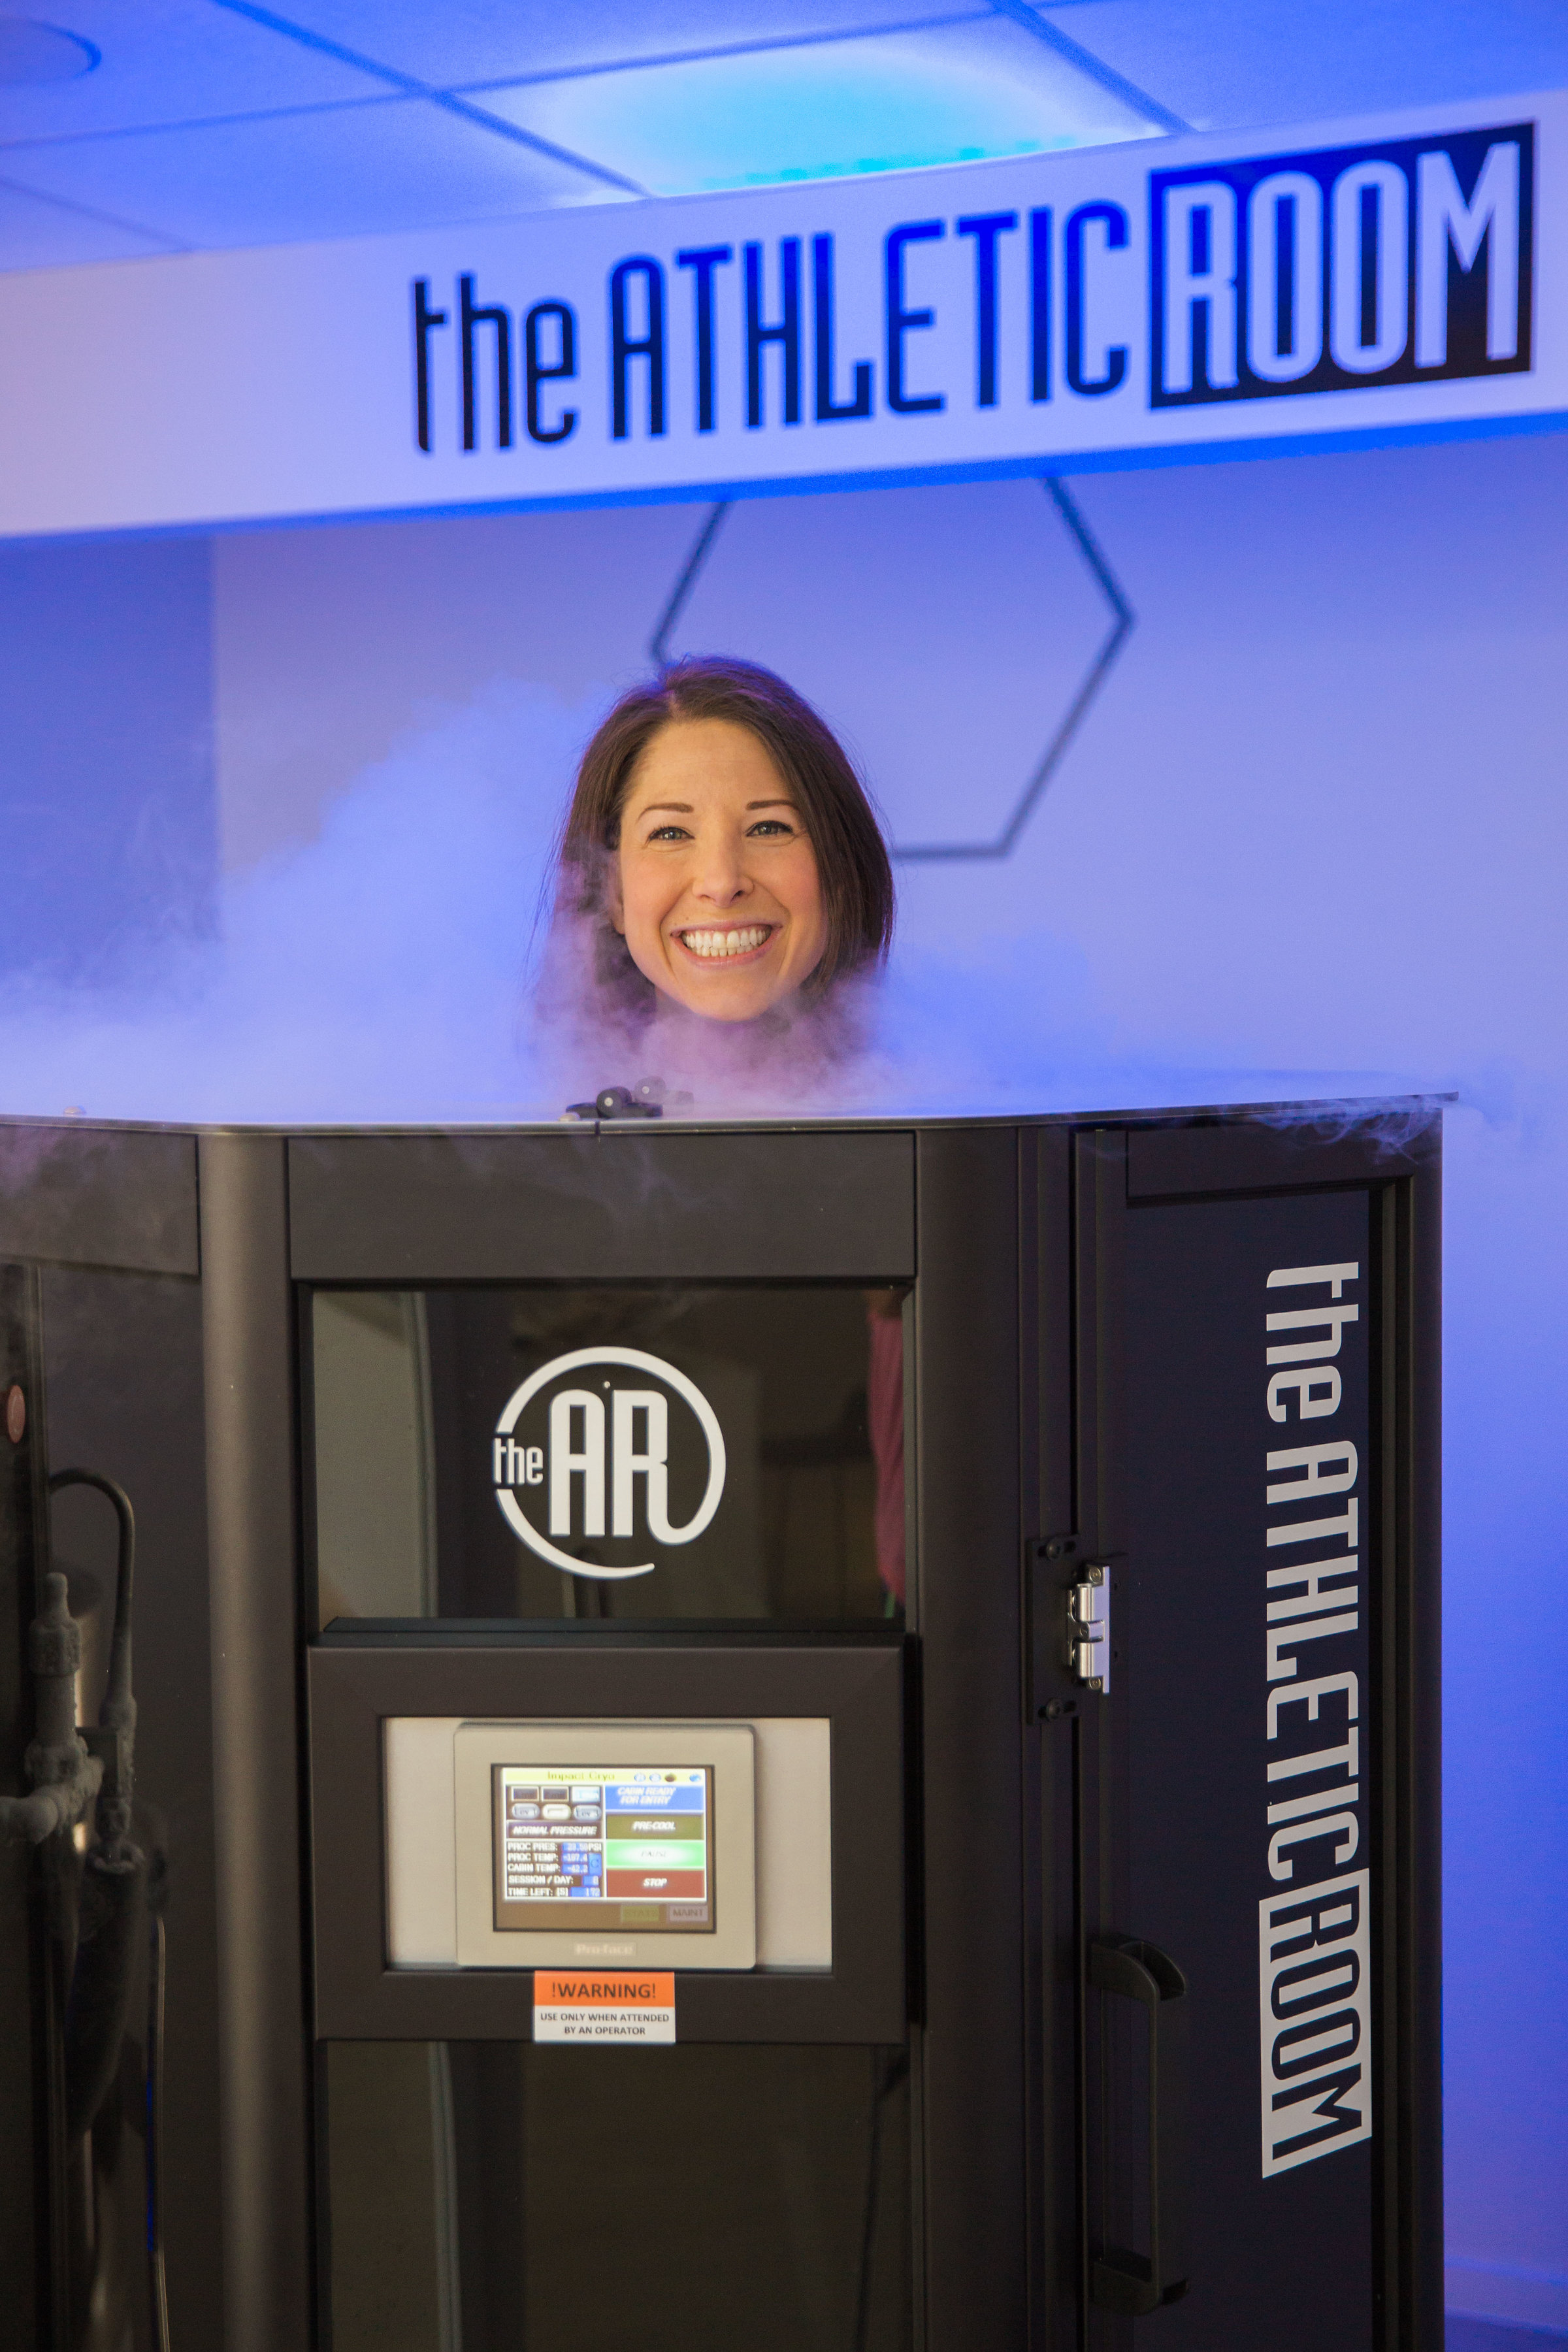 cryotherapy personal story